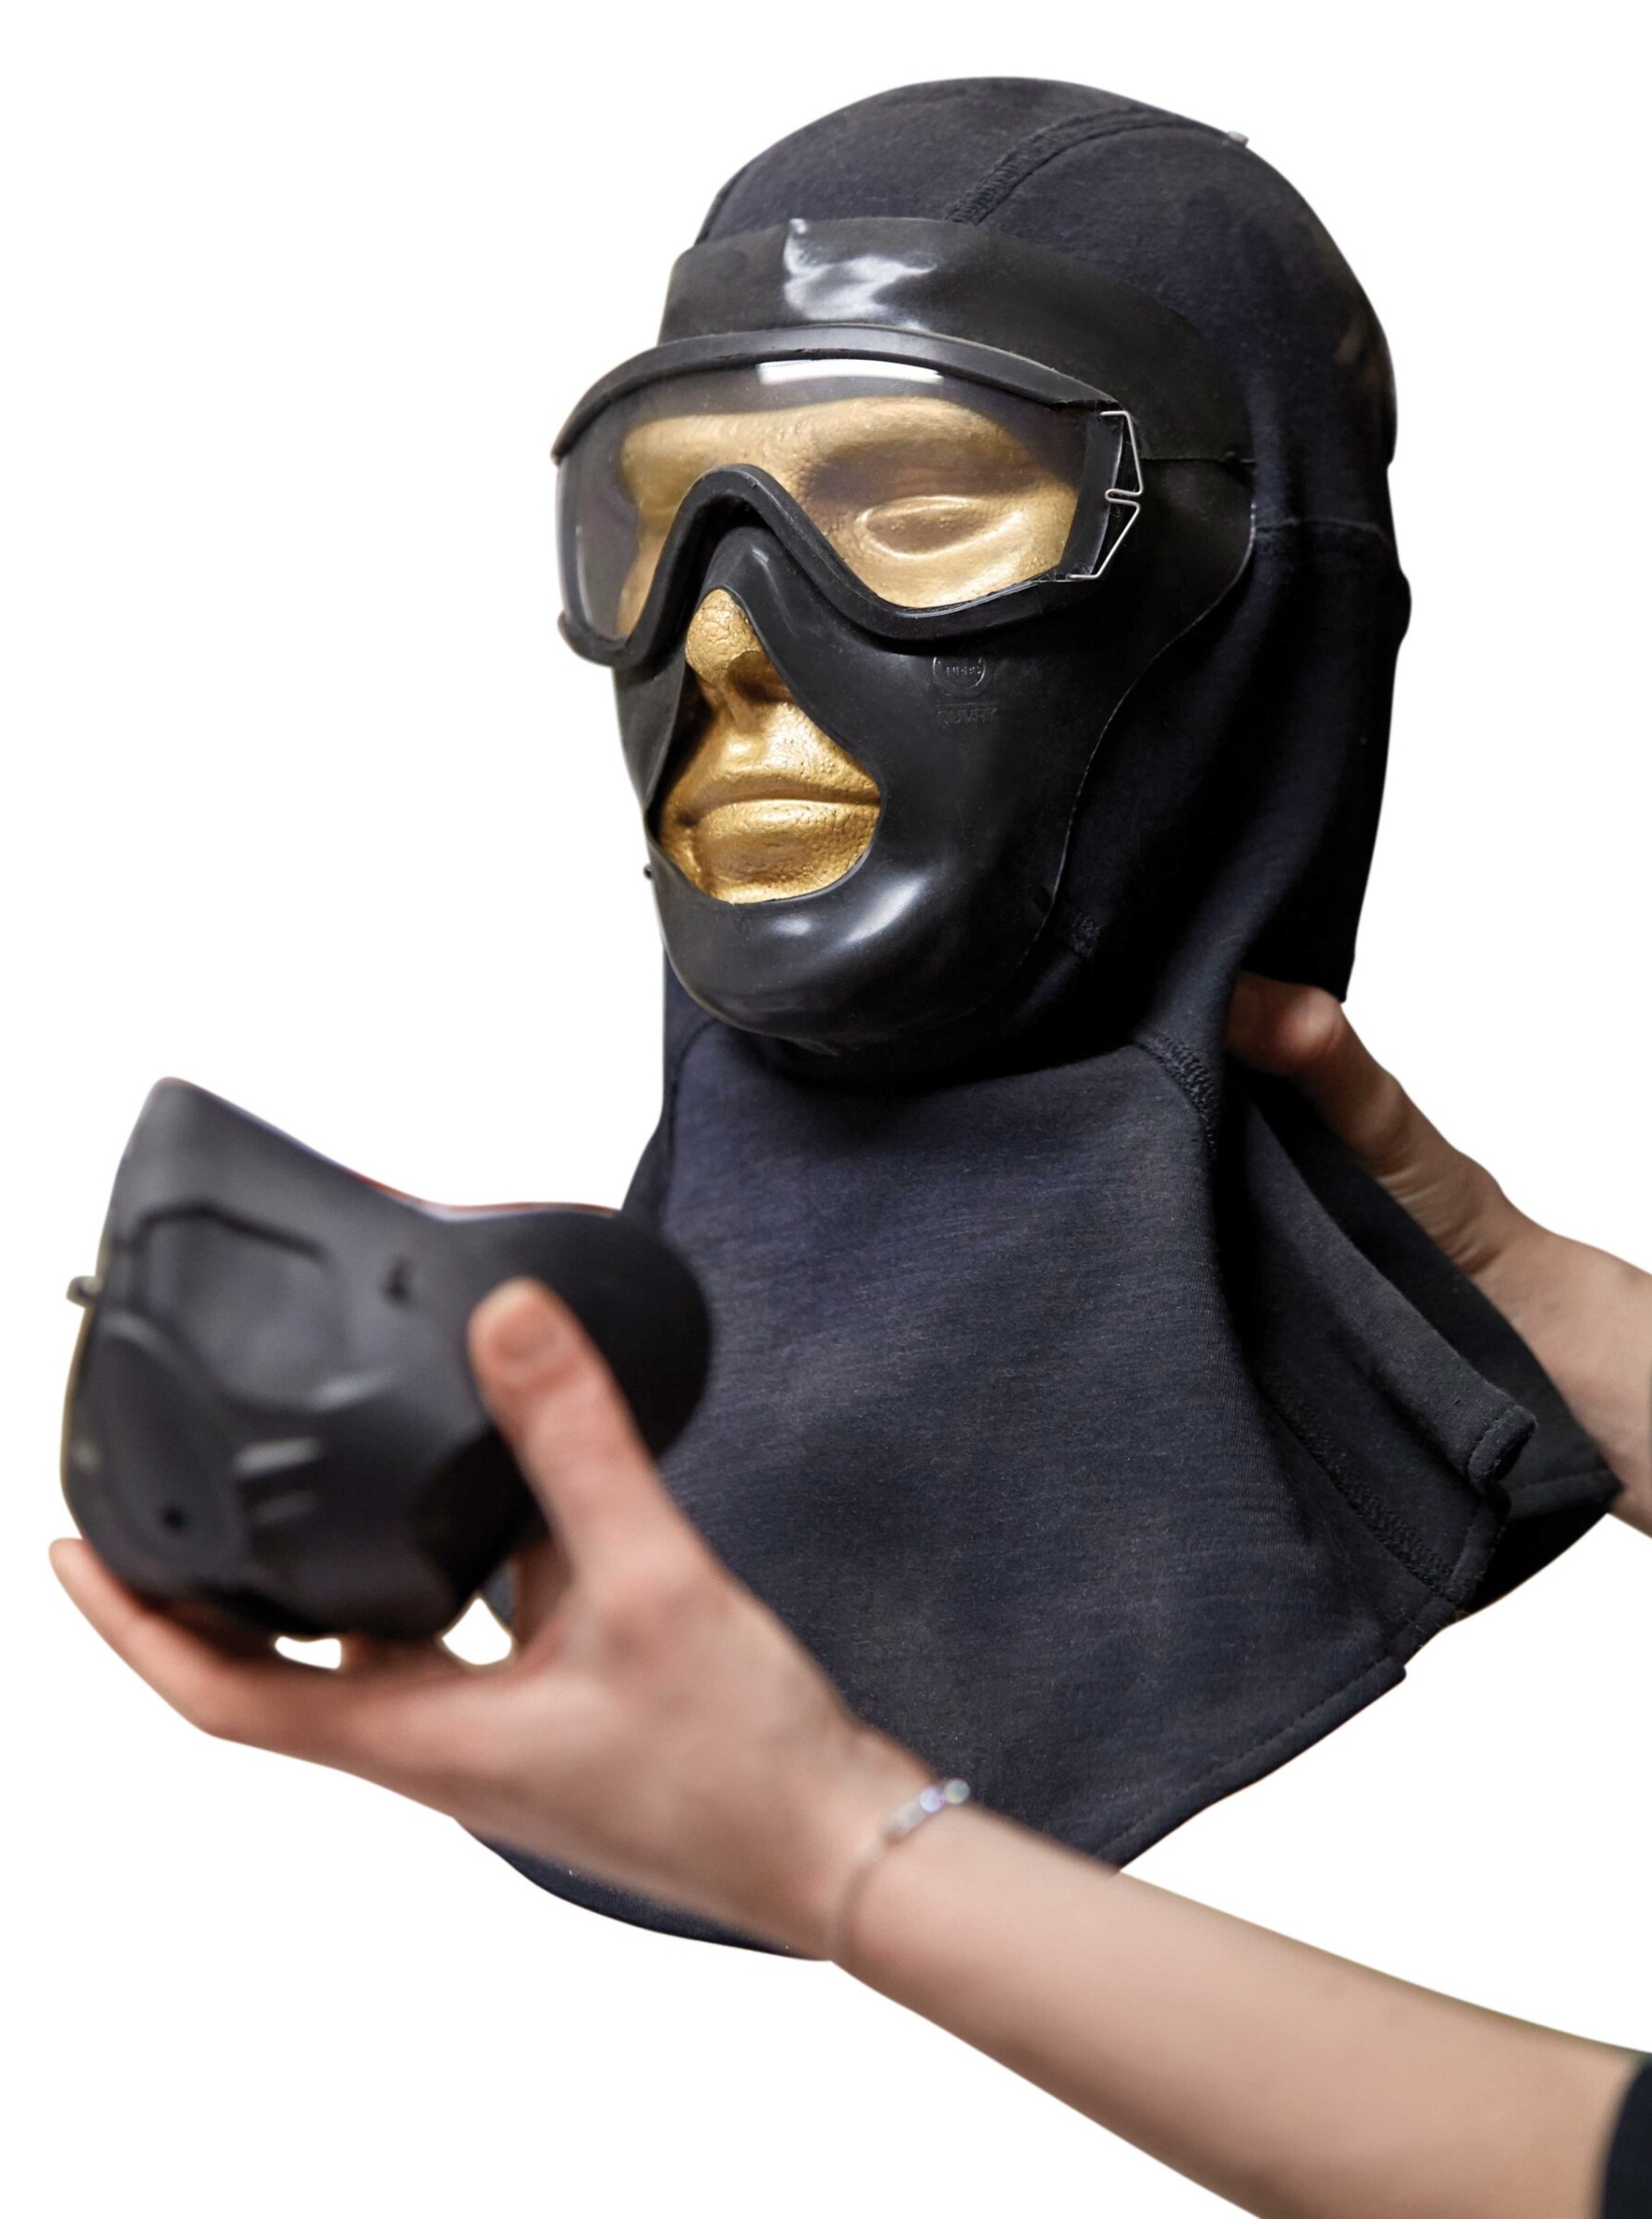 All-round protection: Wearing masks made of silicone, jet pilots and skilled workers in hazardous environments, e.g. during fire-fighting or in power stations, can work safely.